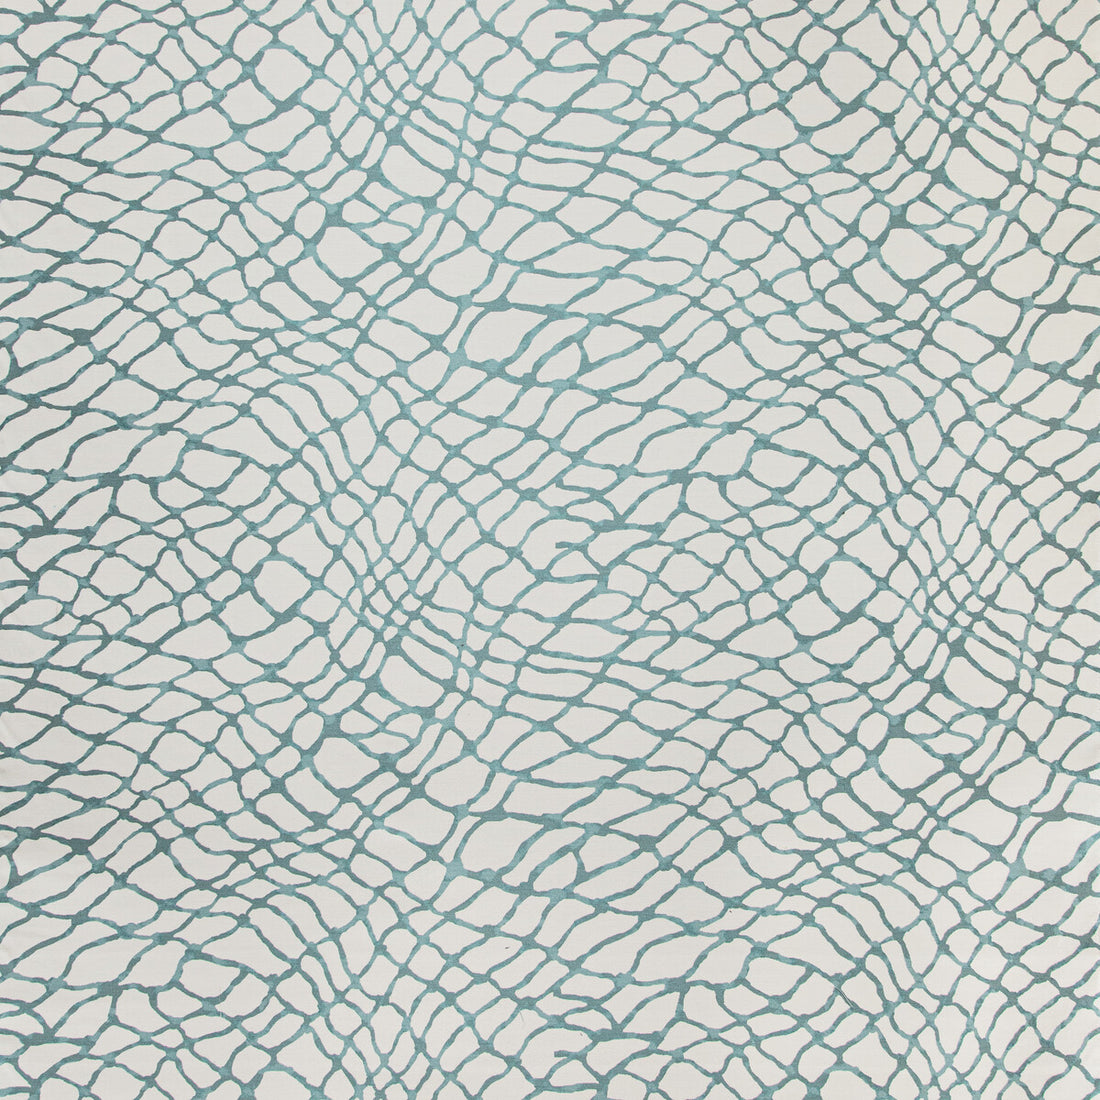 Hawser fabric in lagoon color - pattern 35819.13.0 - by Kravet Design in the Indoor / Outdoor collection